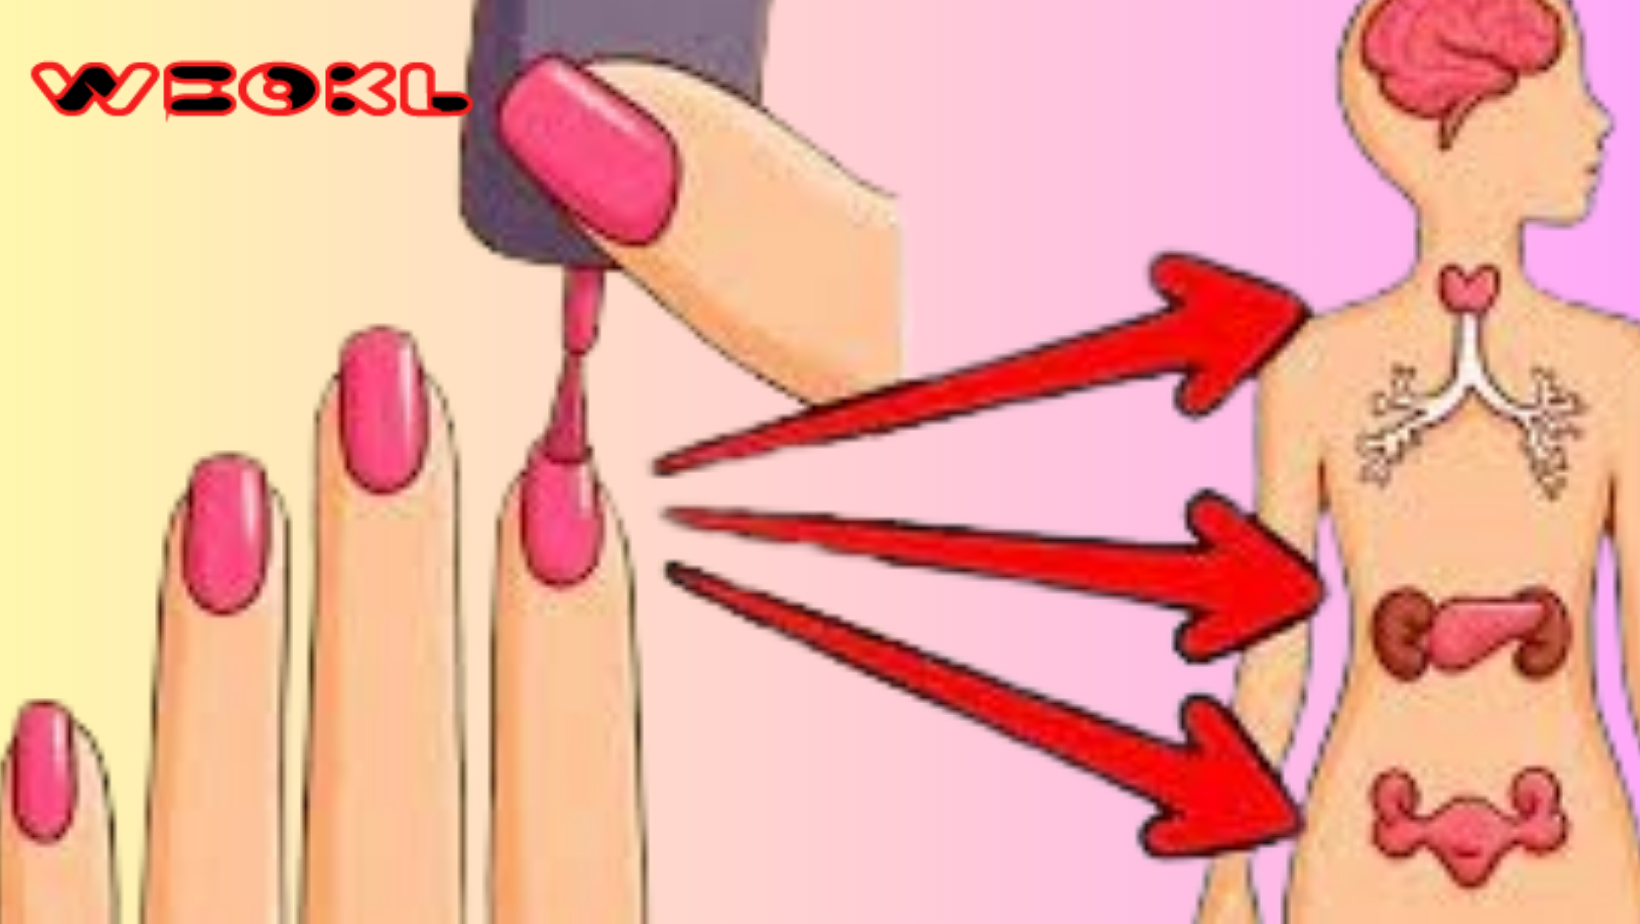 THIS IS WHAT HAPPENS TO YOUR BODY 10 HOURS AFTER PUTTING ON NAIL POLISH